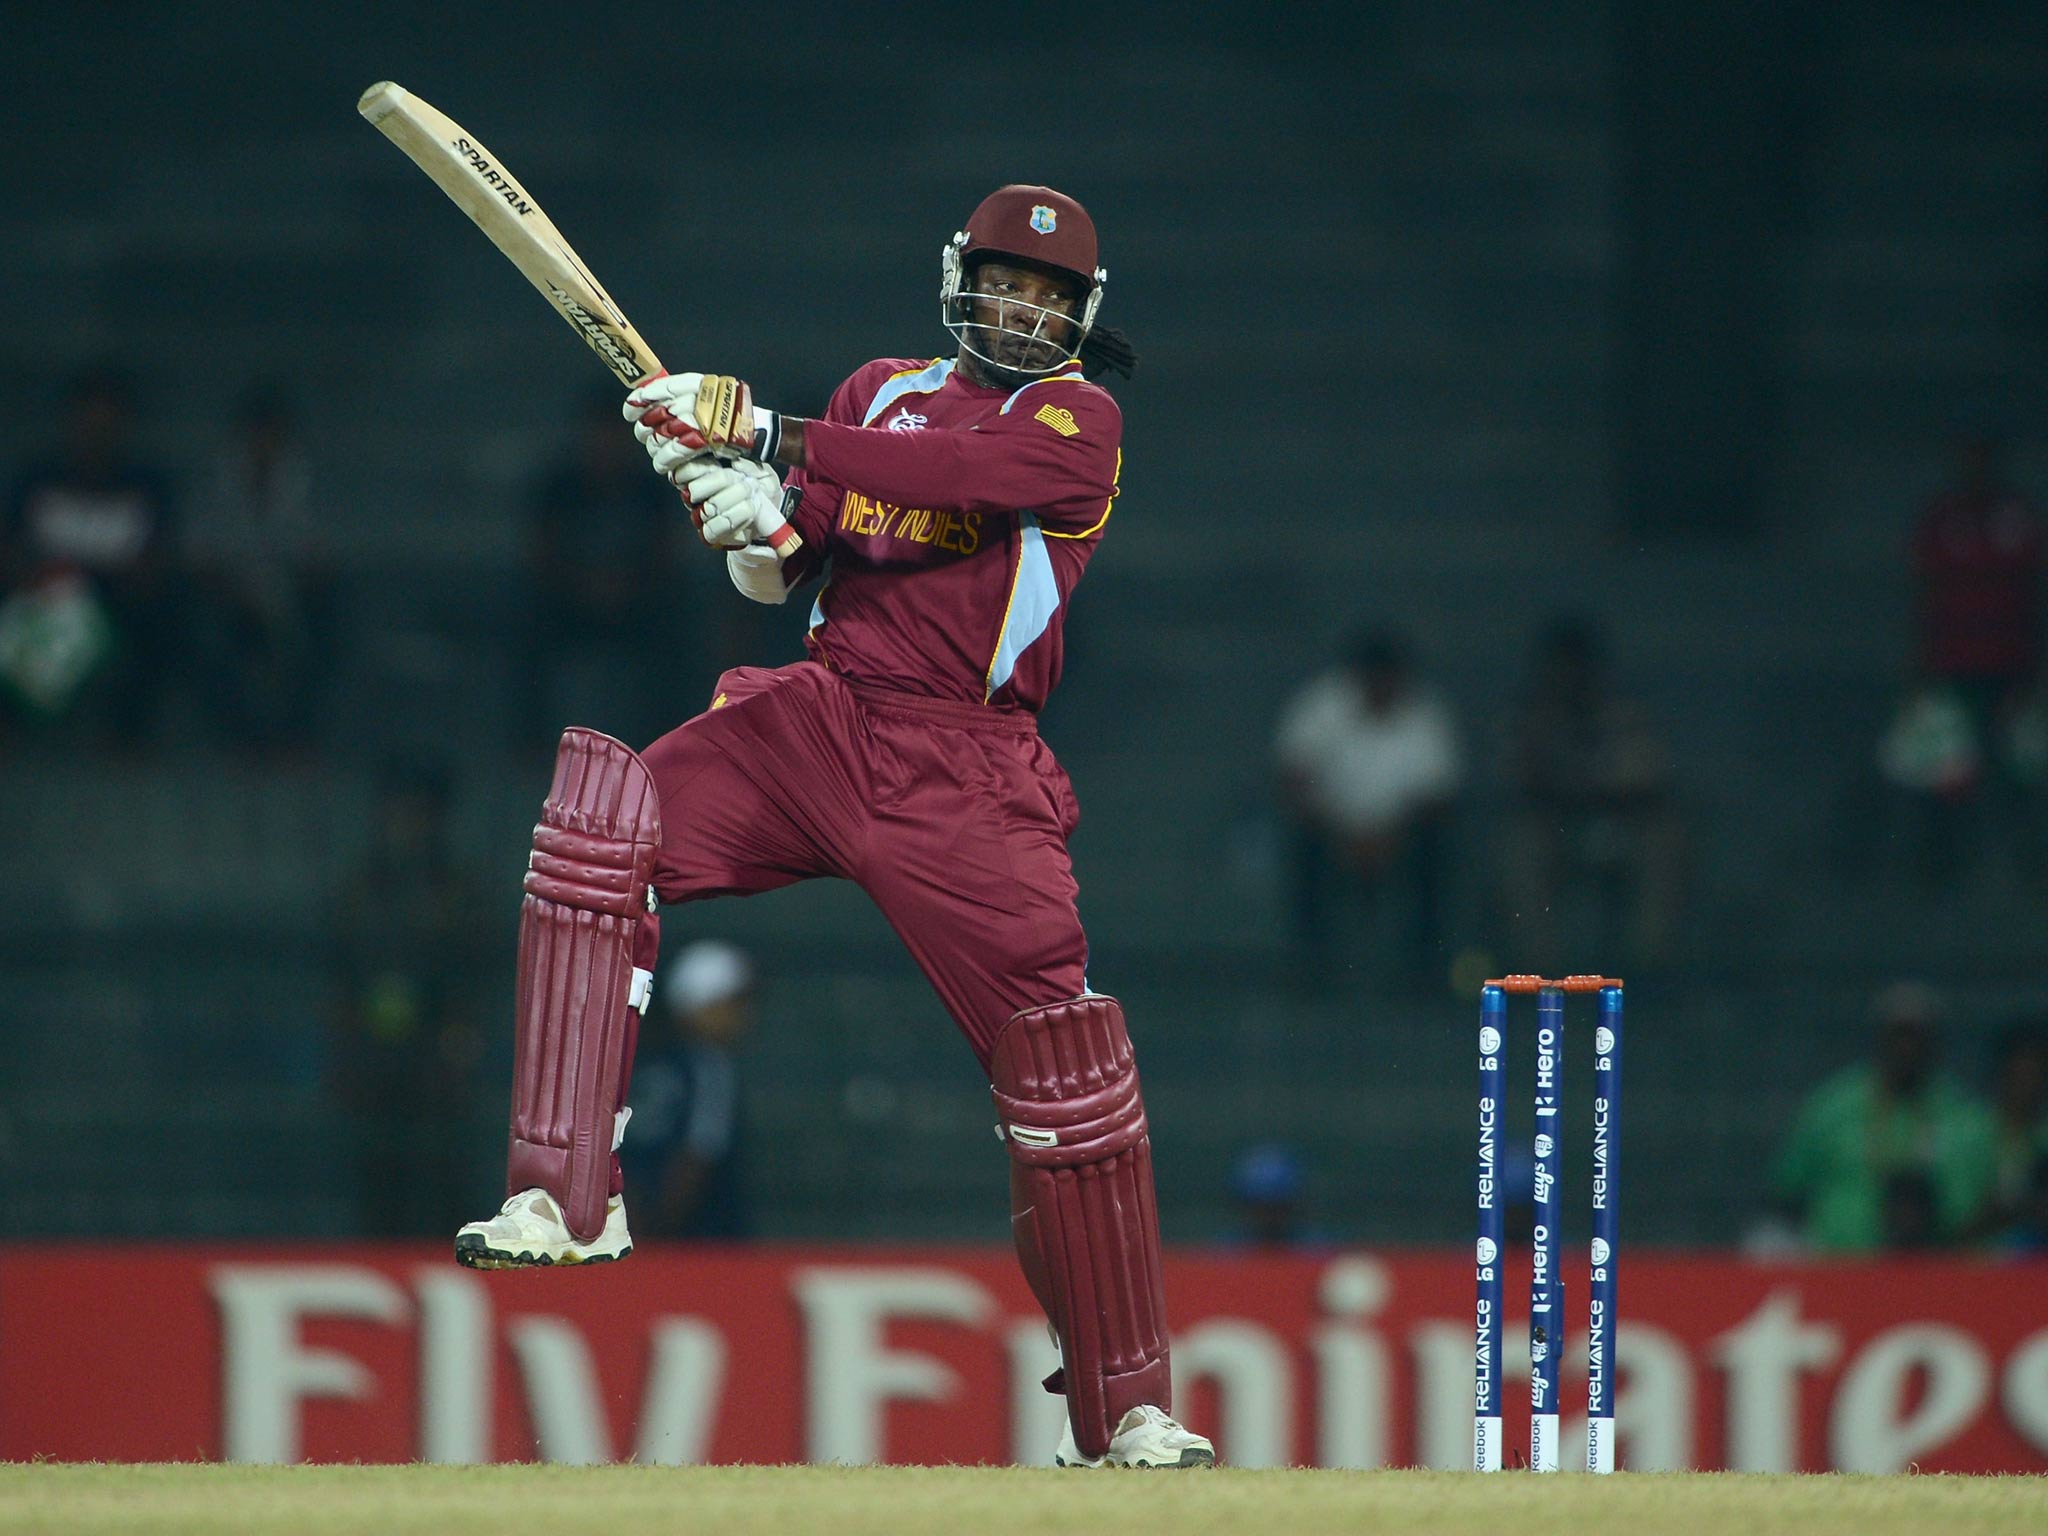 Chris Gayle pictured batting for West Indies